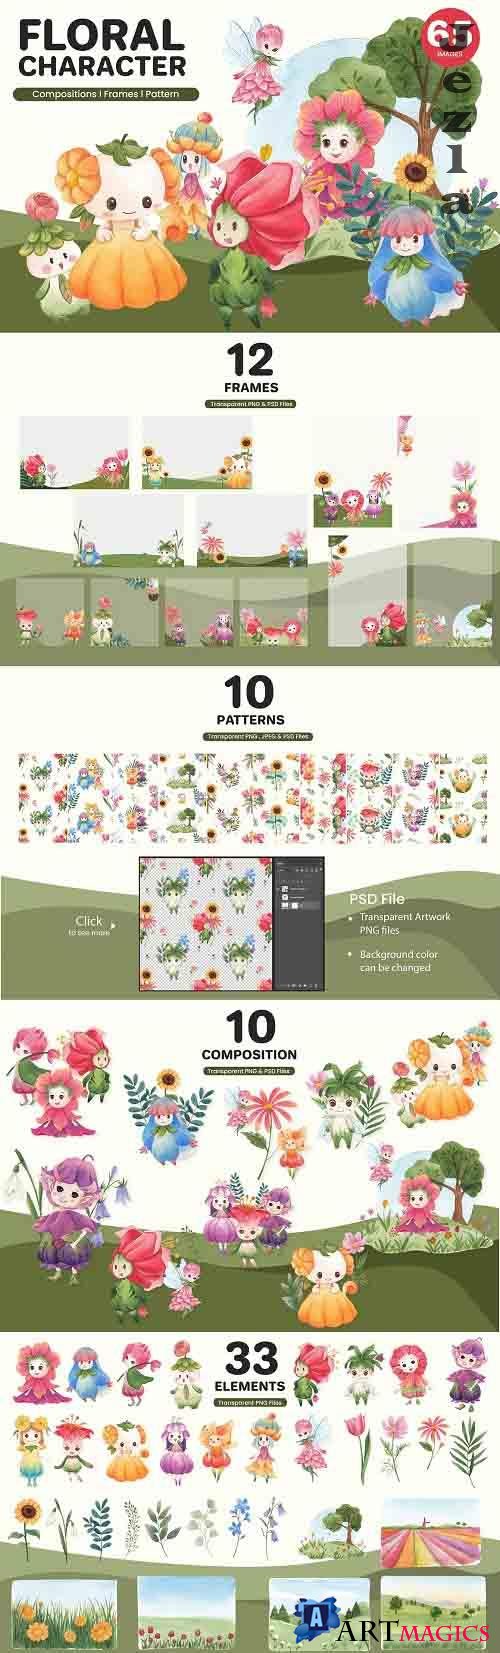 Floral Fairly tail Character - 6021463